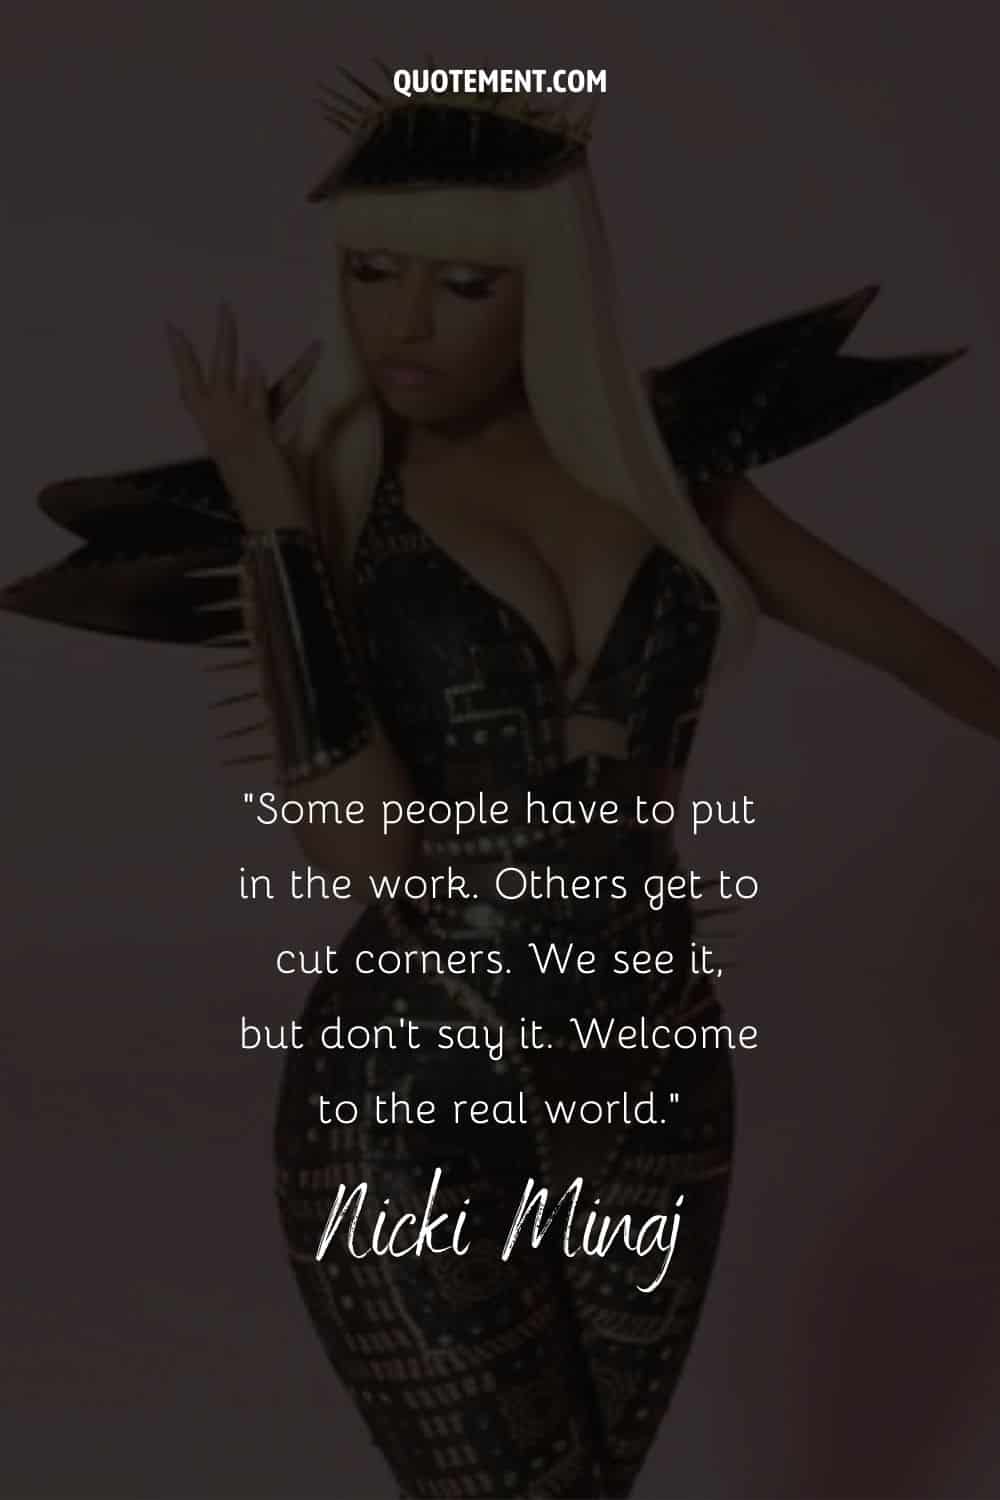 Inspiring quote by Nicki Minaj and her image in the background